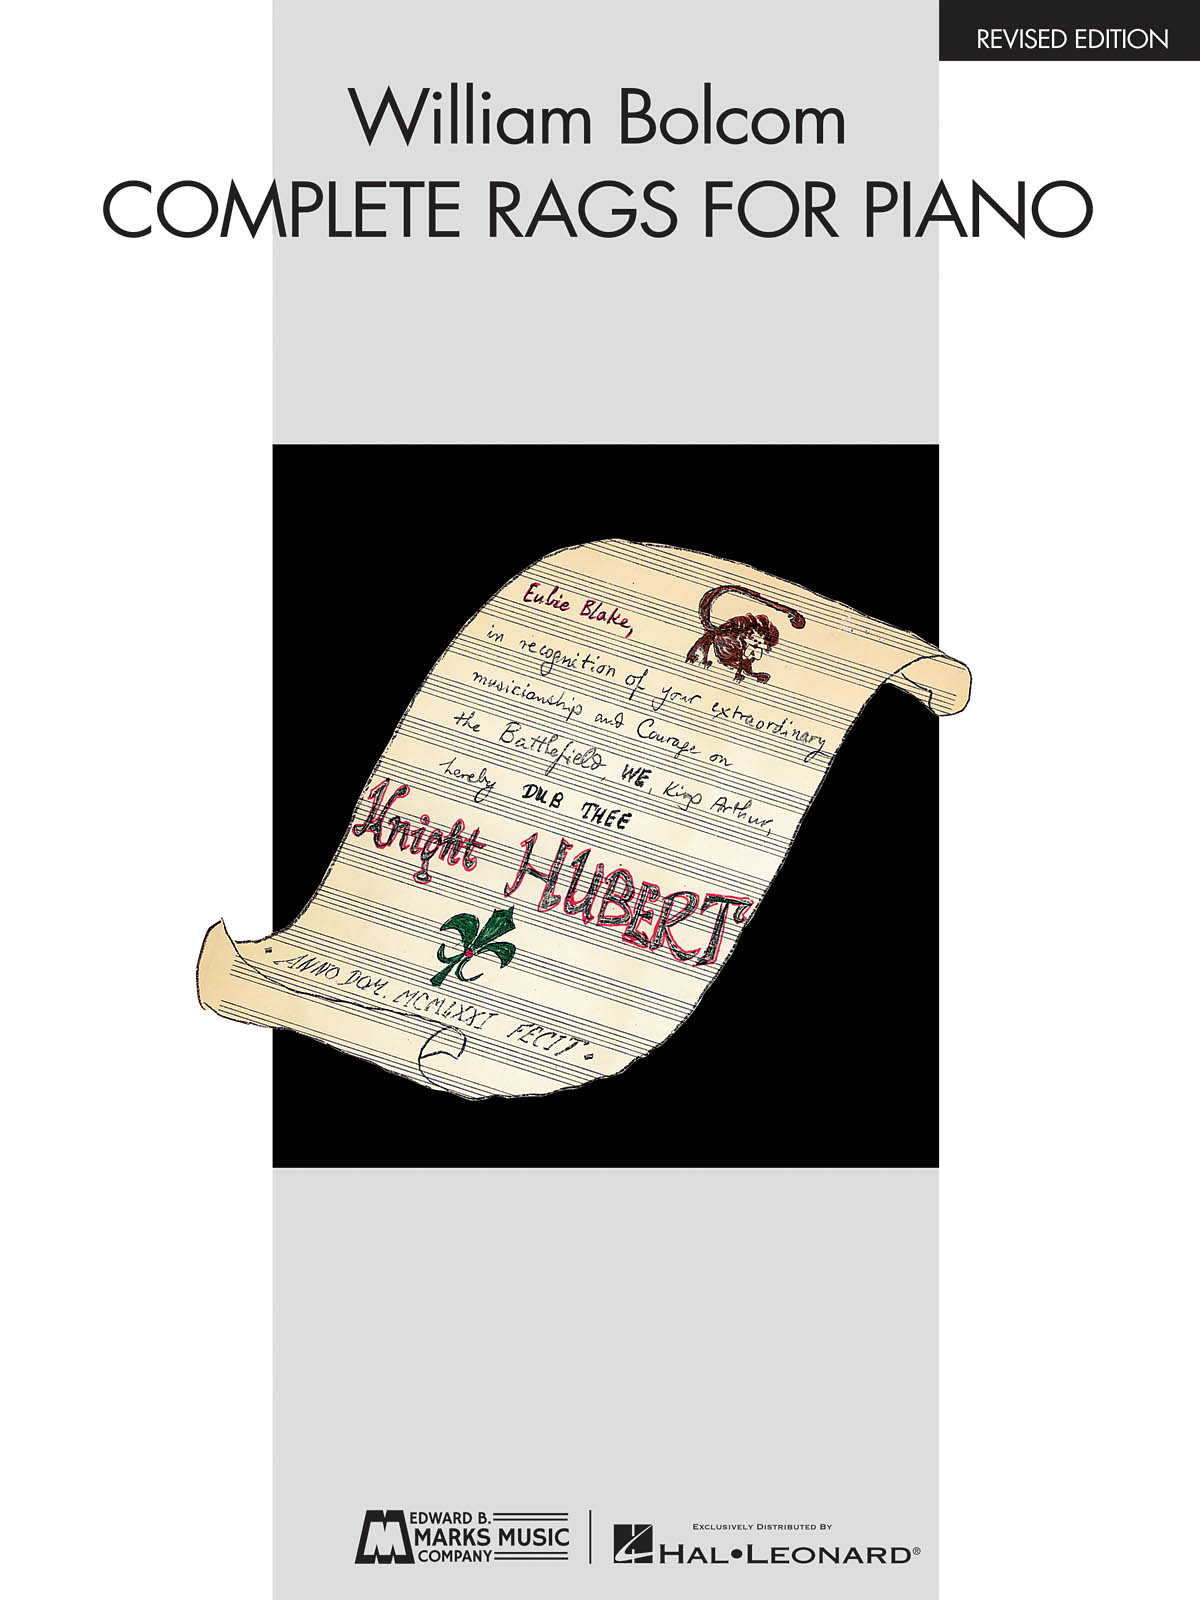 Complete Rags for Piano